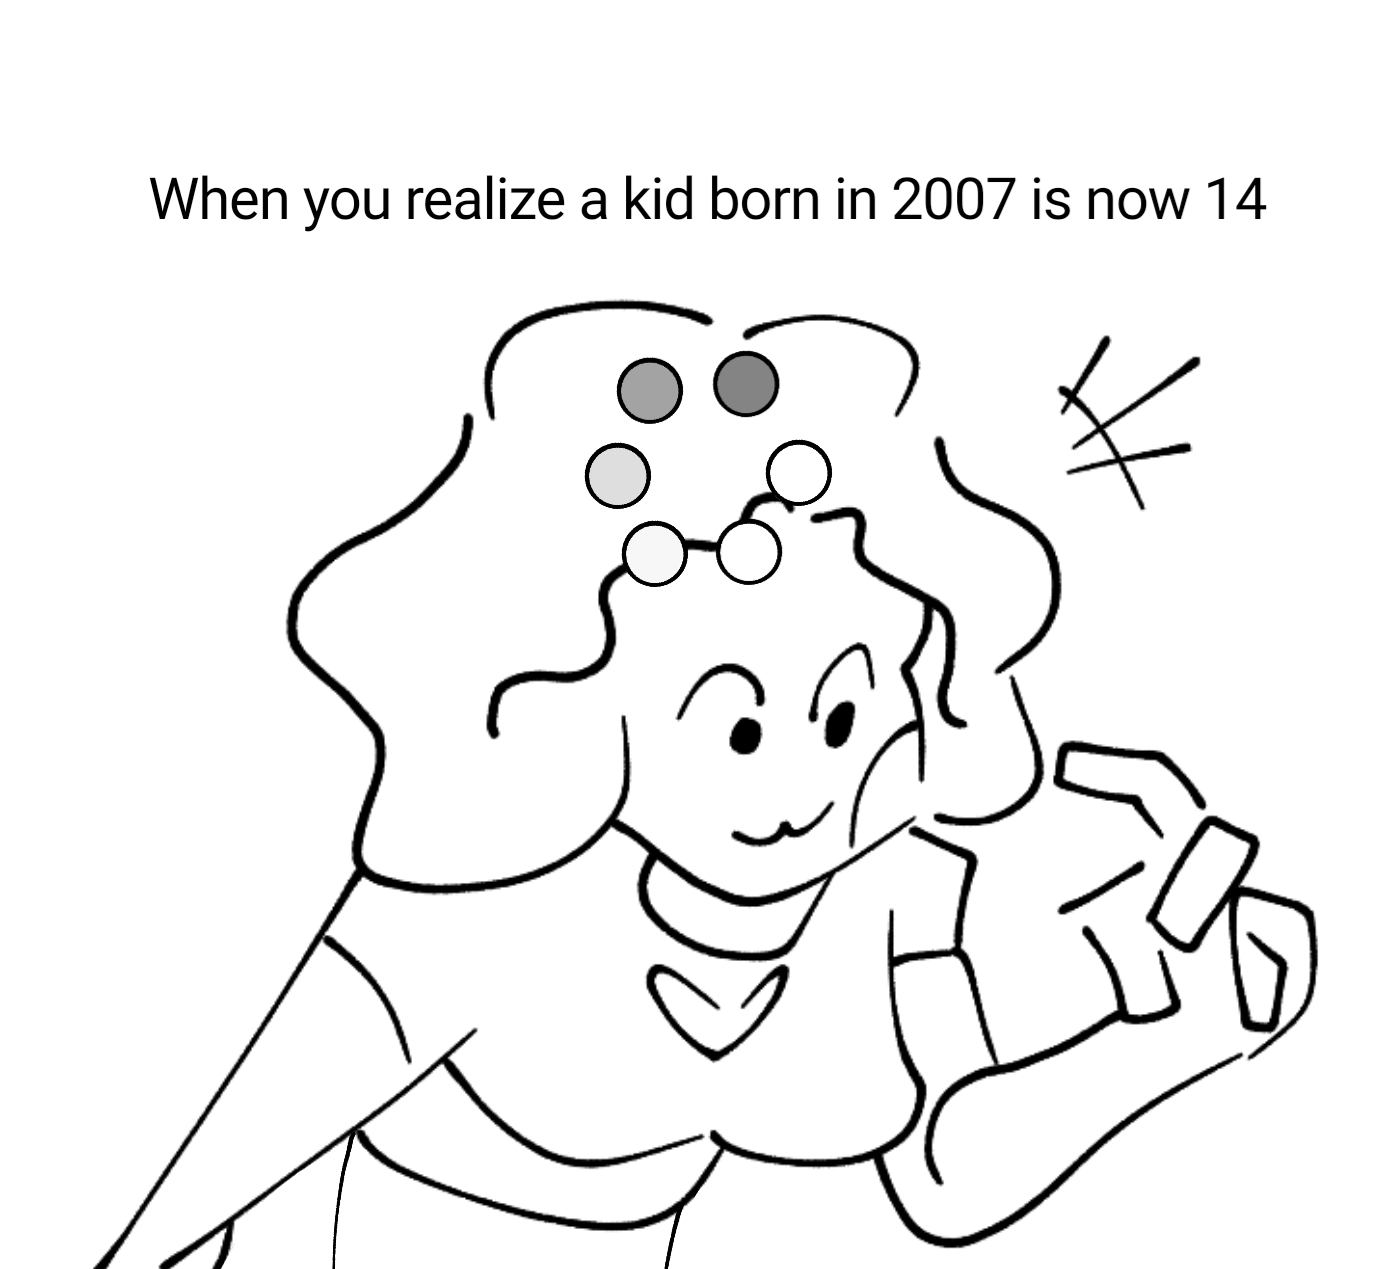 kid born in 2007 is now 14 - When you realize a kid born in 2007 is now 14 a K